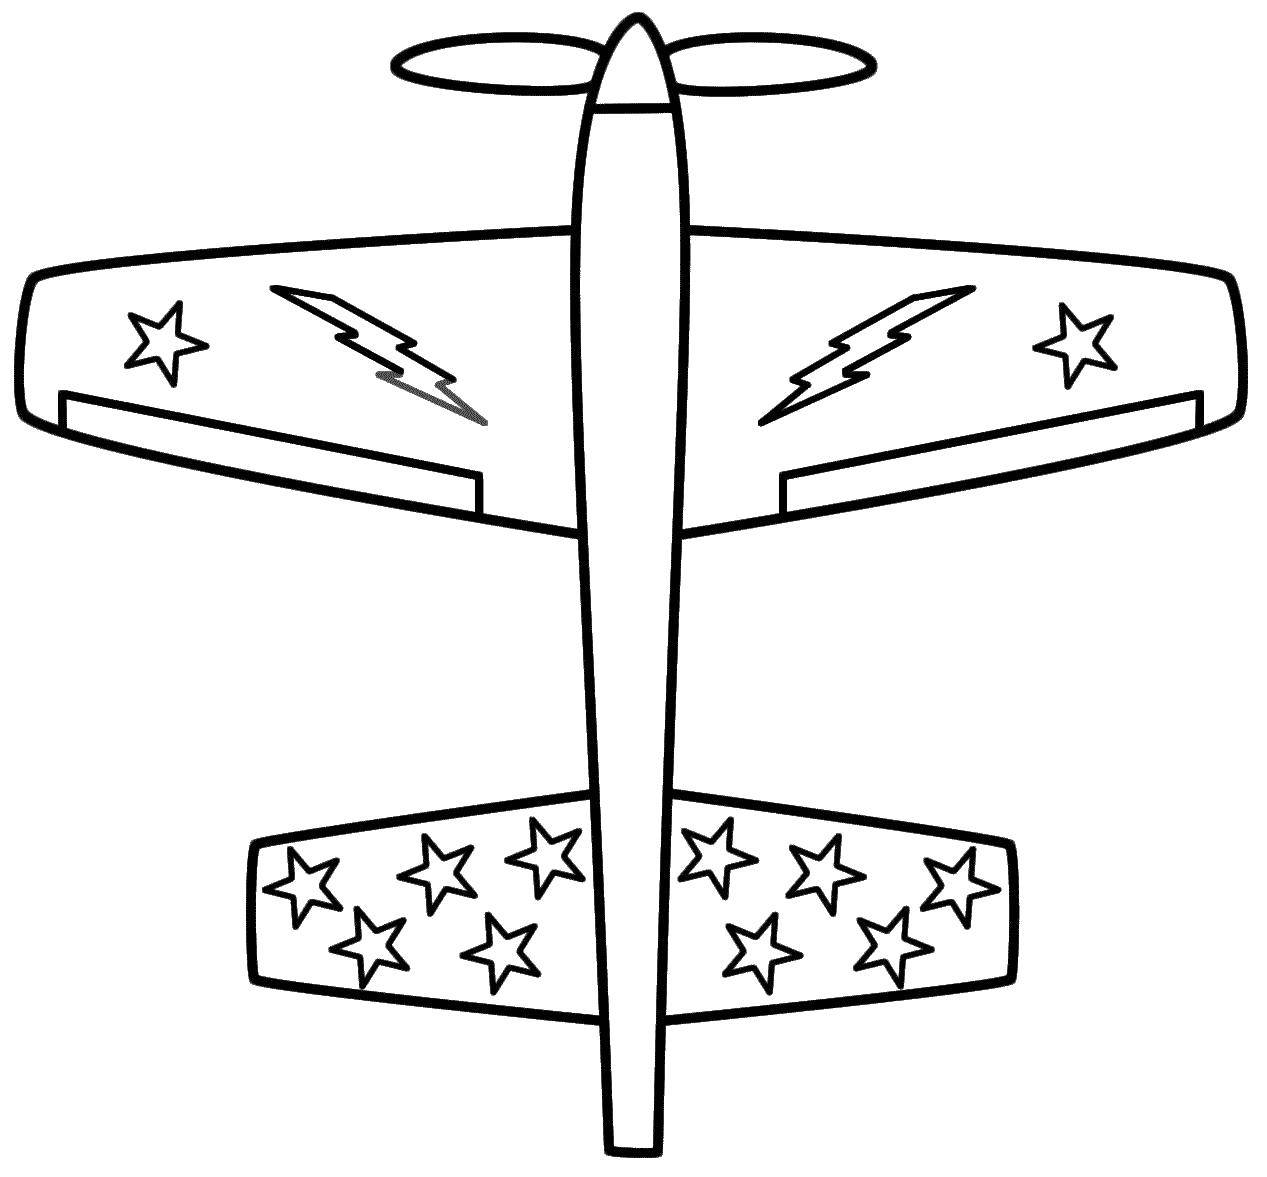 Coloring Beautiful airplane. Category The planes. Tags:  Plane.